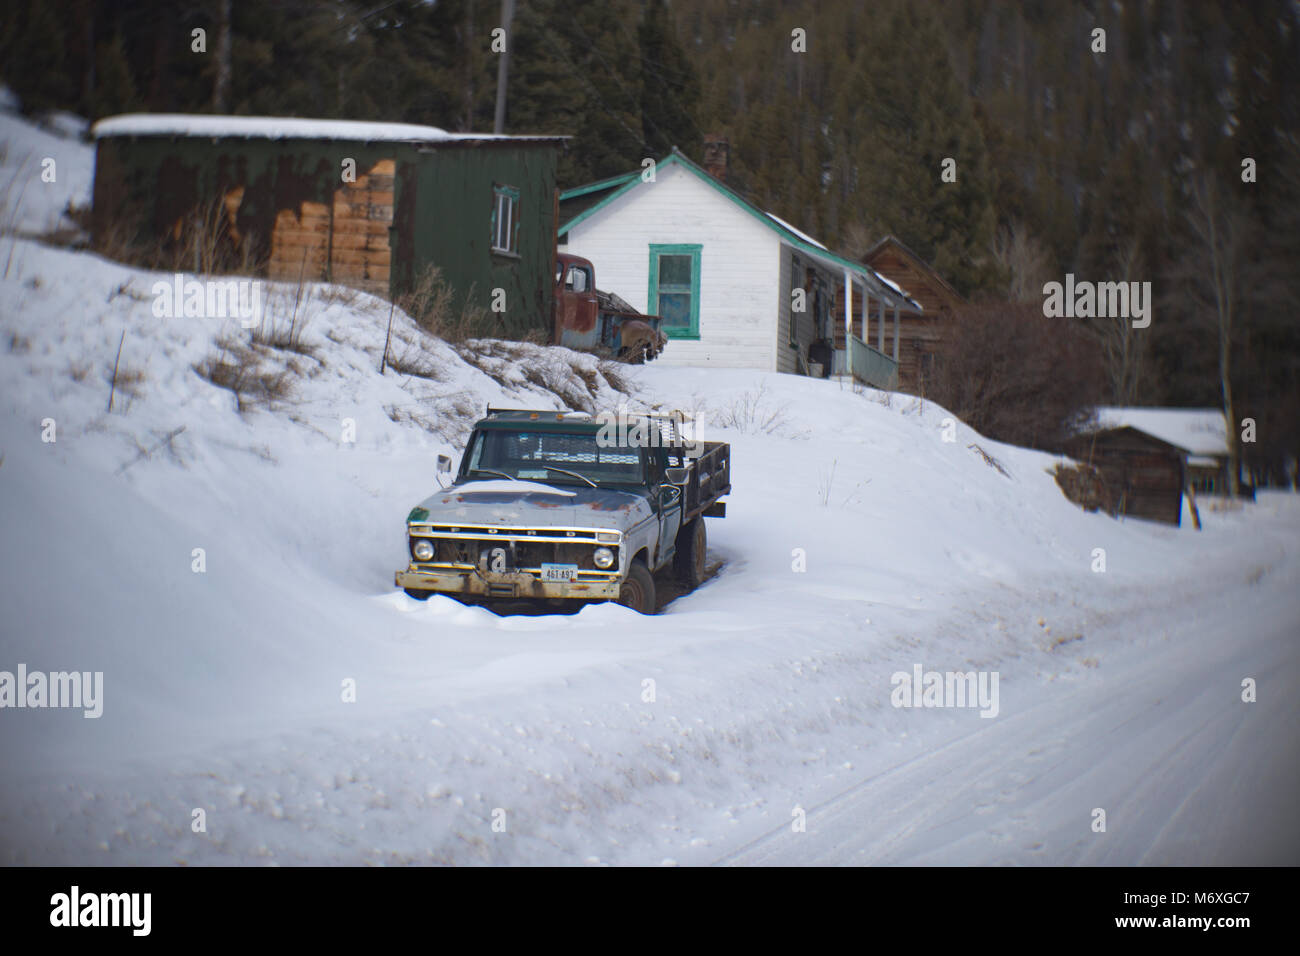 A 1978 Ford F150 stake side pickup truck, covered in the snow, in the old mining town of Tower, Granite County, Montana. Stock Photo